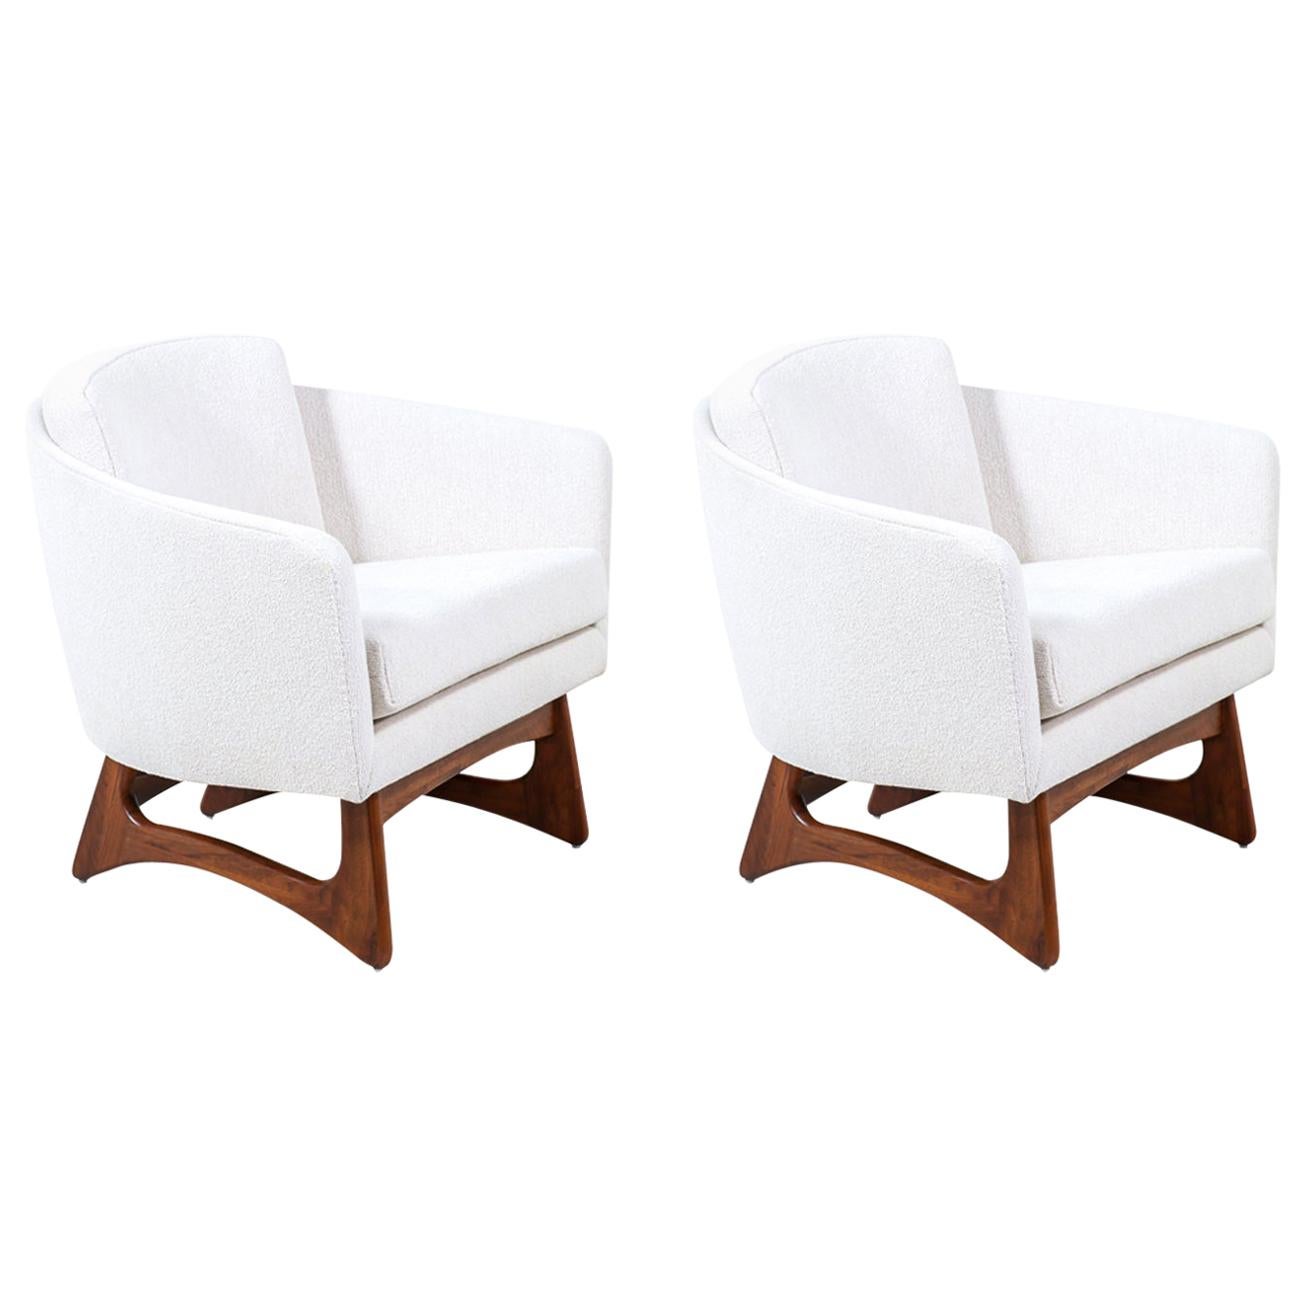 Adrian Pearsall Barrel Lounge Chairs for Craft Associates